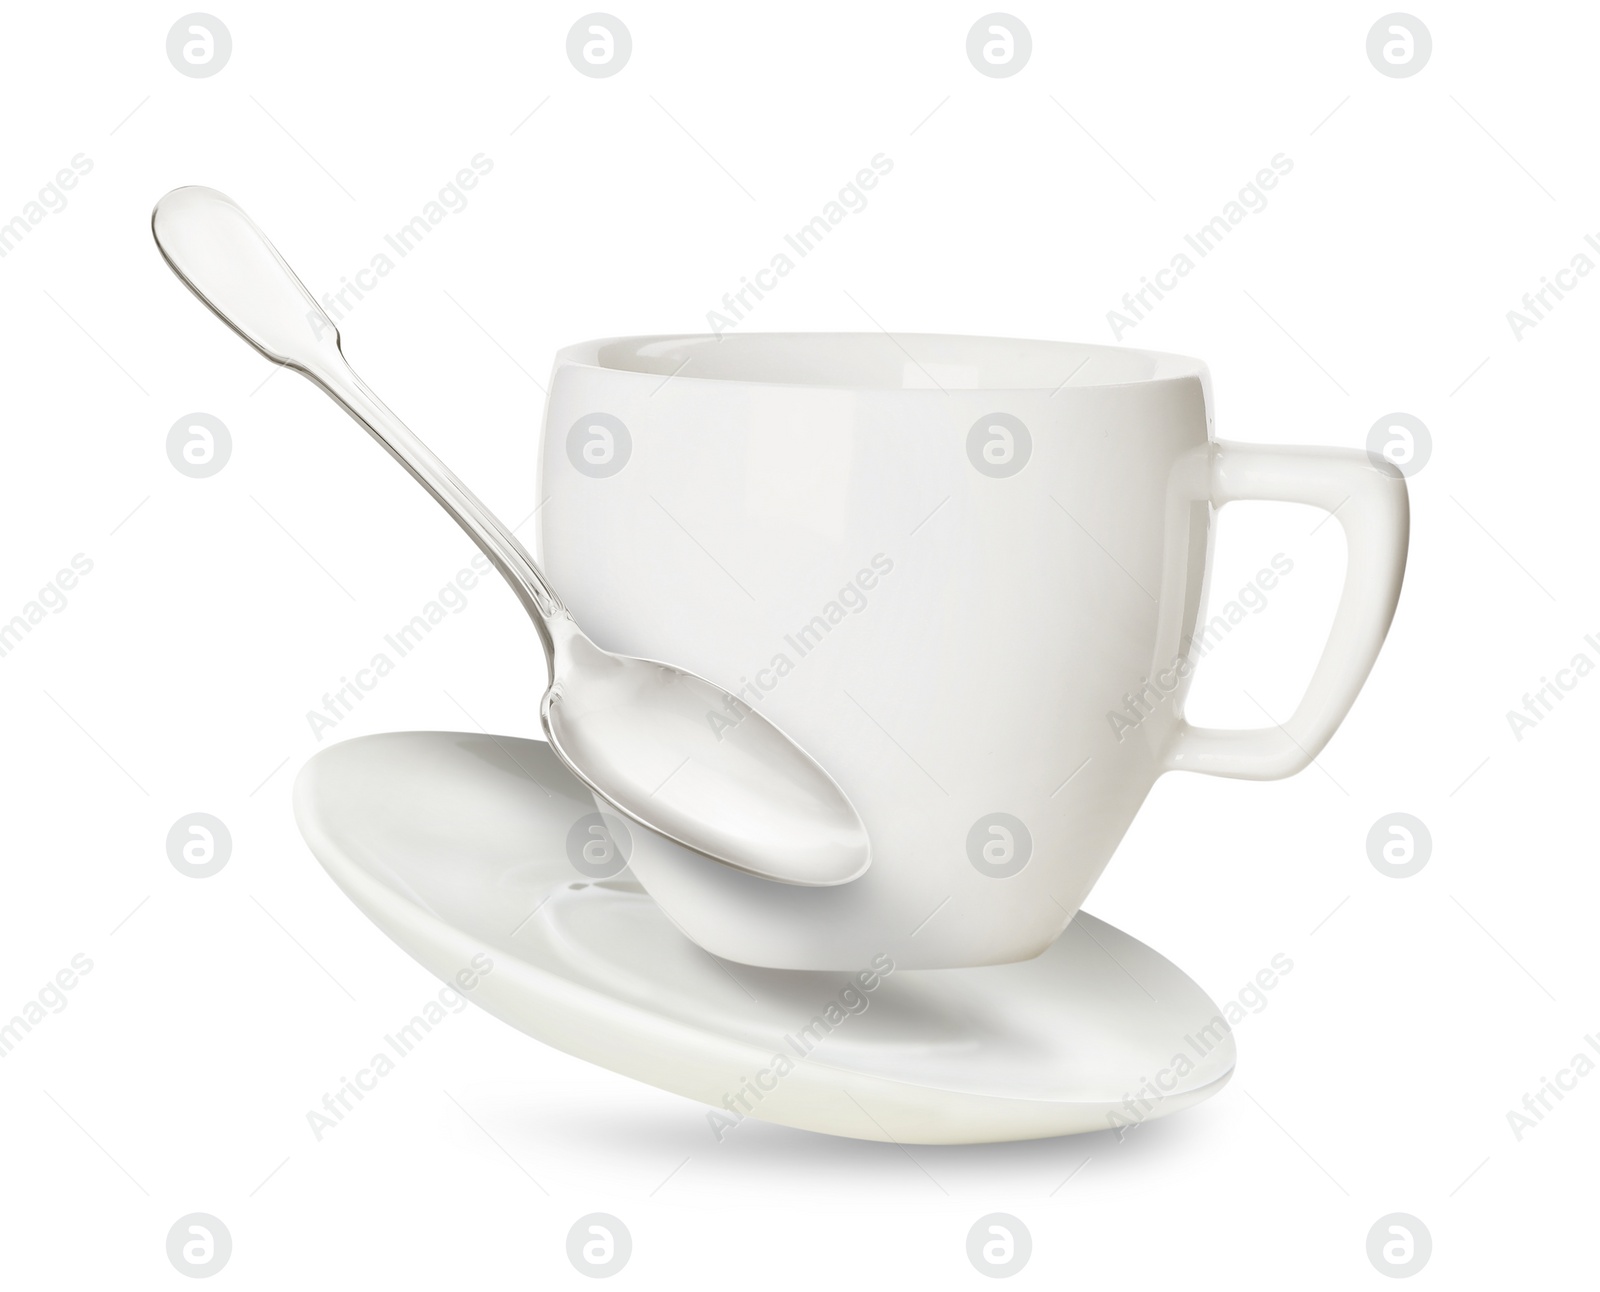 Image of Clean cup with saucer and teaspoon in flight on white background